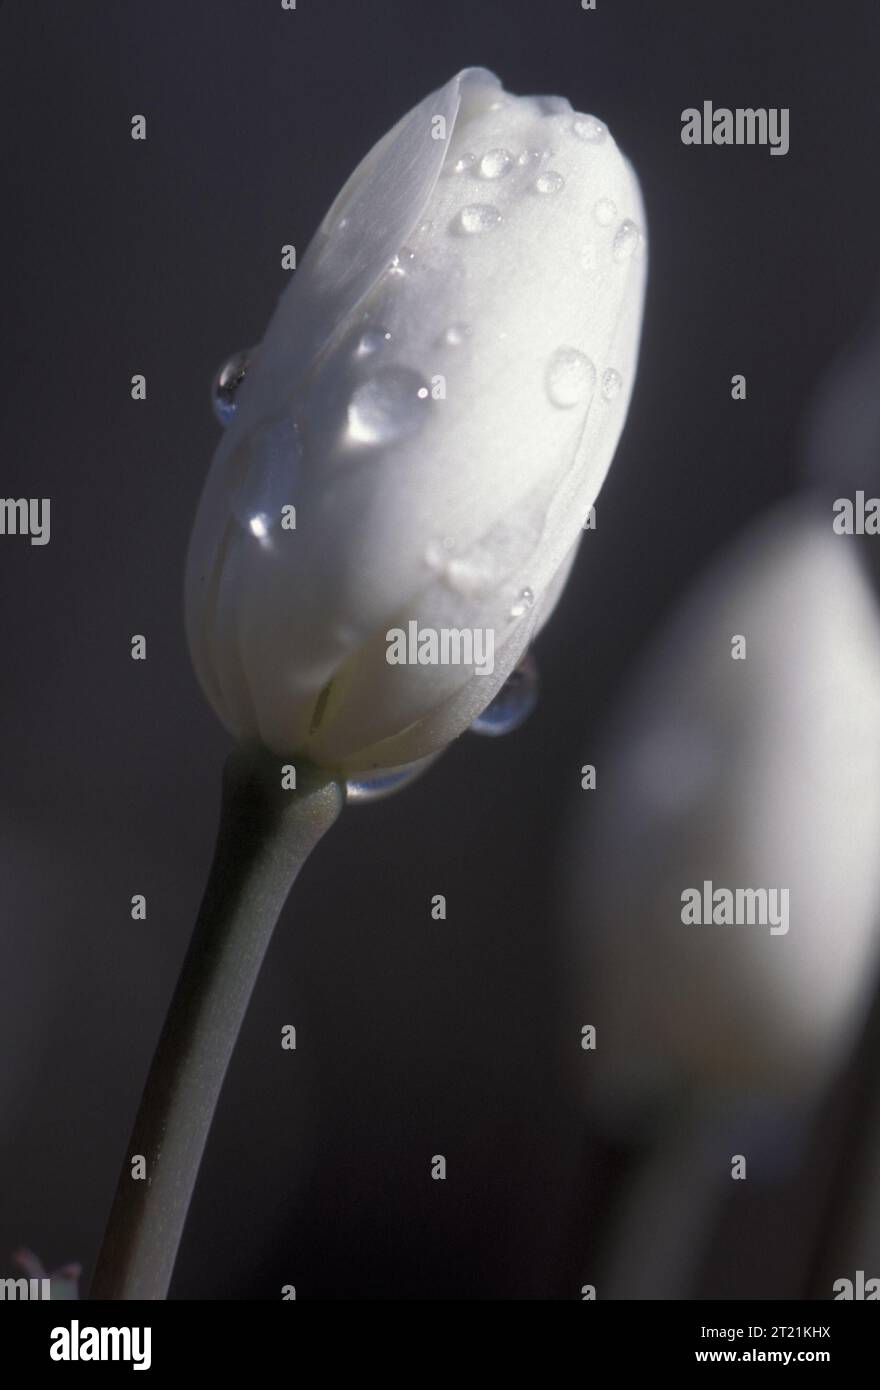 A close view of a soon to bloom, white twinleaf flower with moisure beads. Subjects: Flowering plants; Plants. Stock Photo